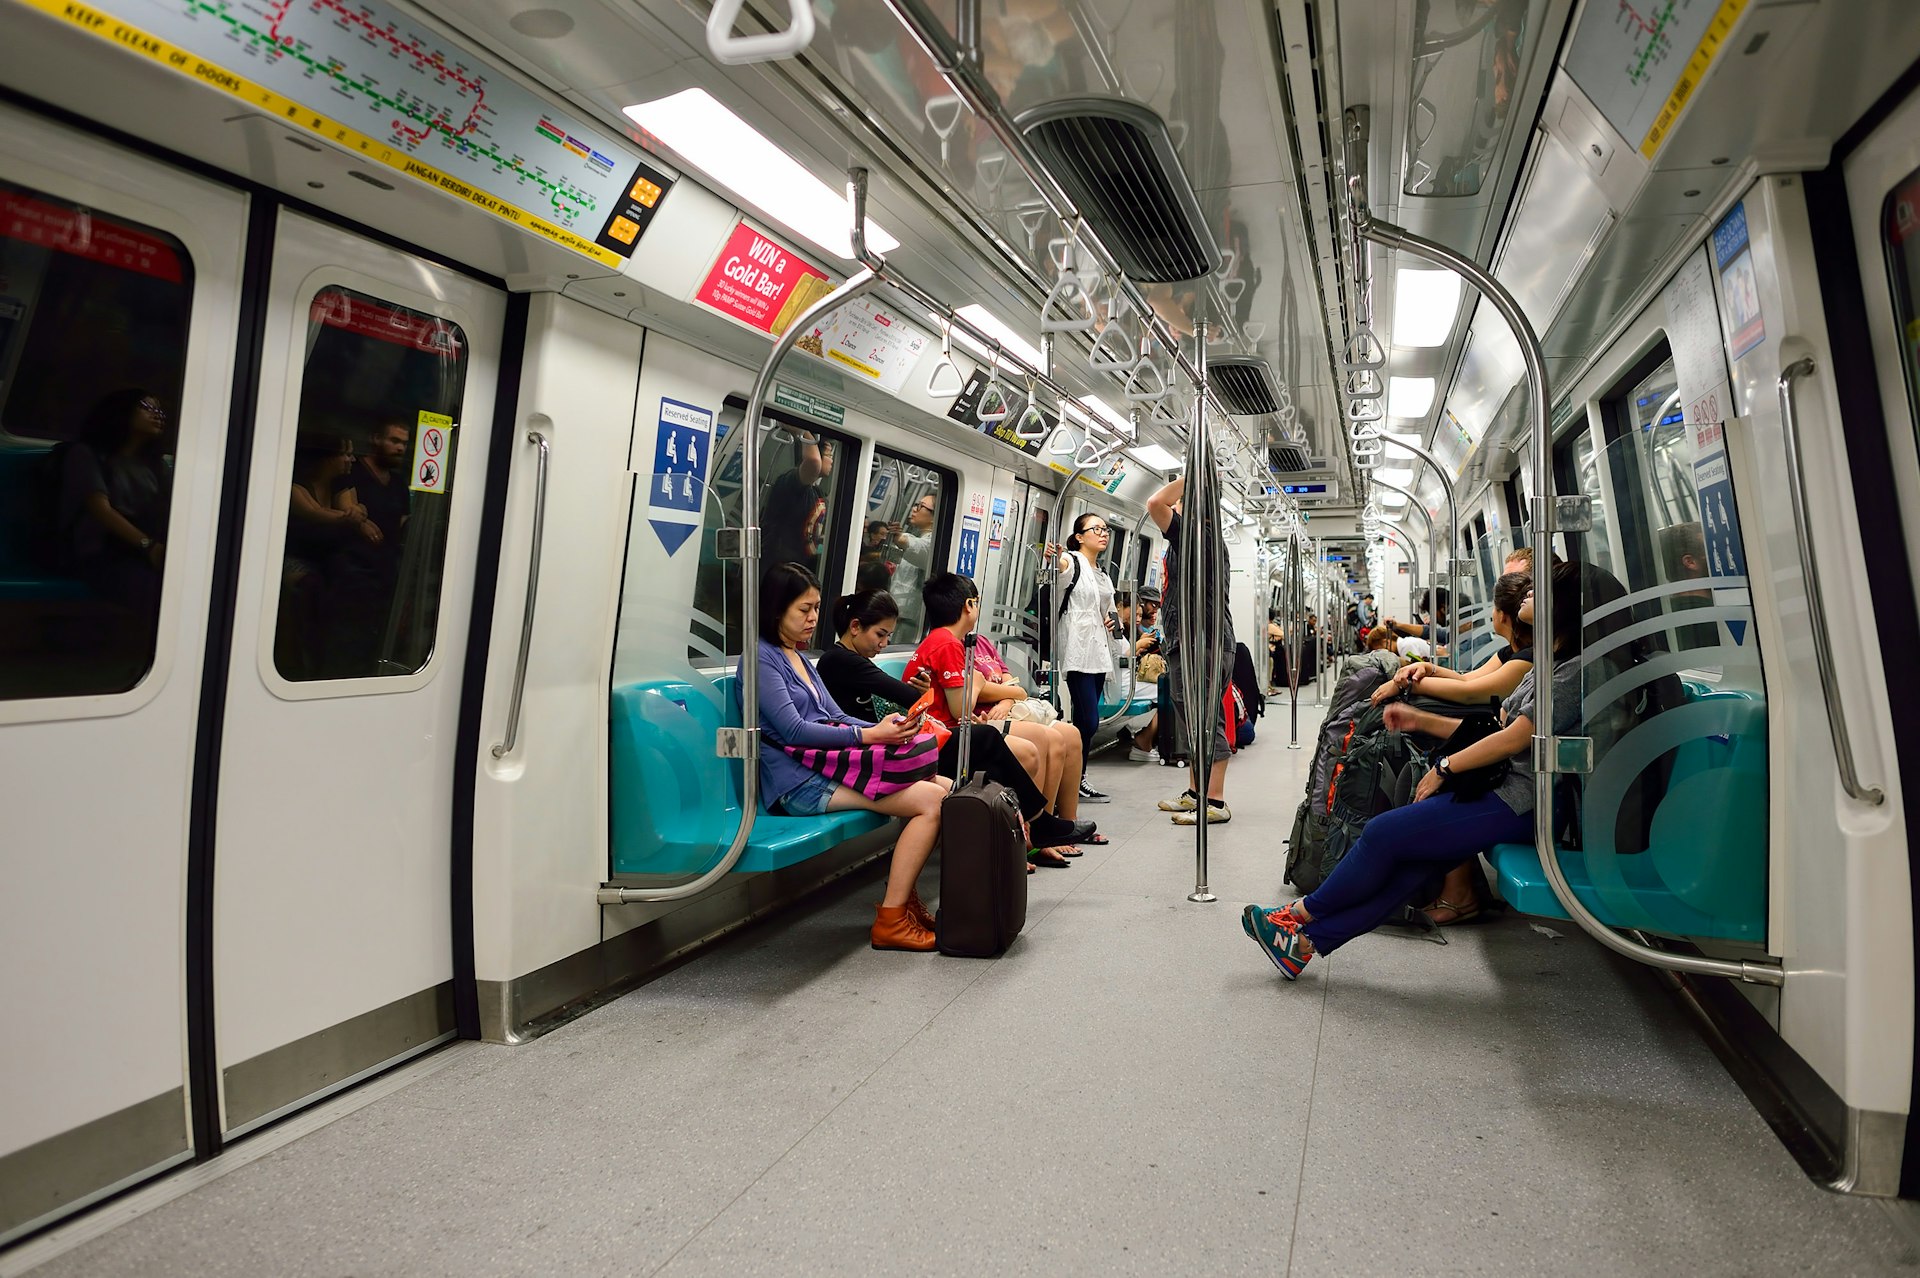 Interior of a The Mass Rapid Transit, or MRT carriage in Singapore